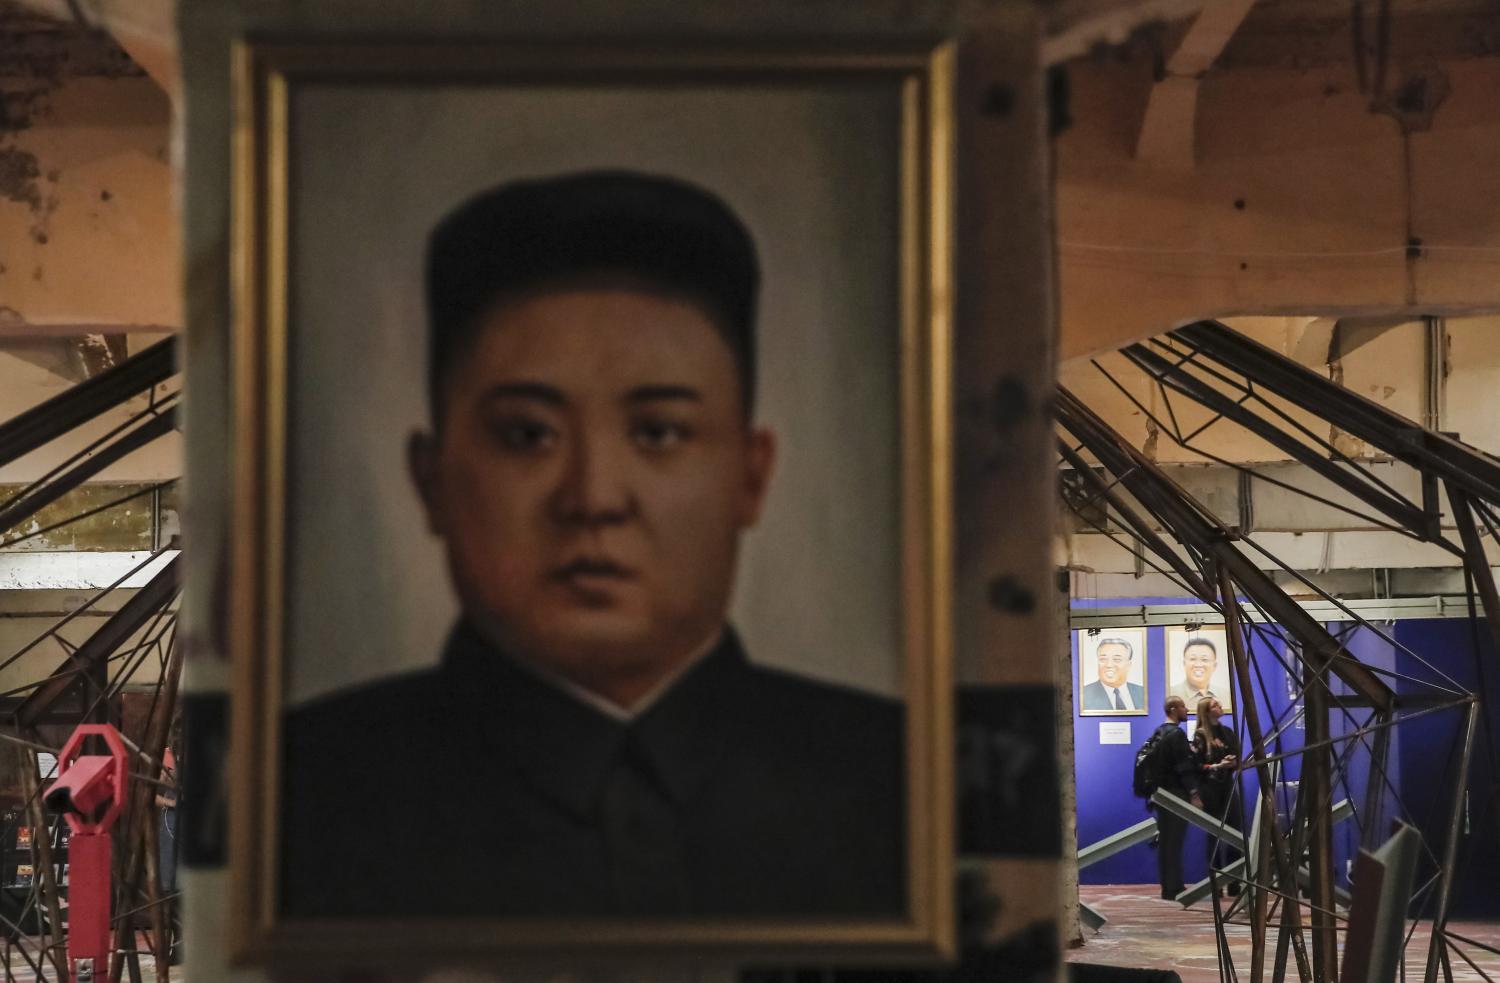 Portraits of North Korean leaders Kim Jong Un, Kim Il-sung and Kim Jong-il are on display at the "Made In North Korea" exhibition held at the UMAM museum in Moscow, Russia January 20, 2018. REUTERS/Maxim Shemetov